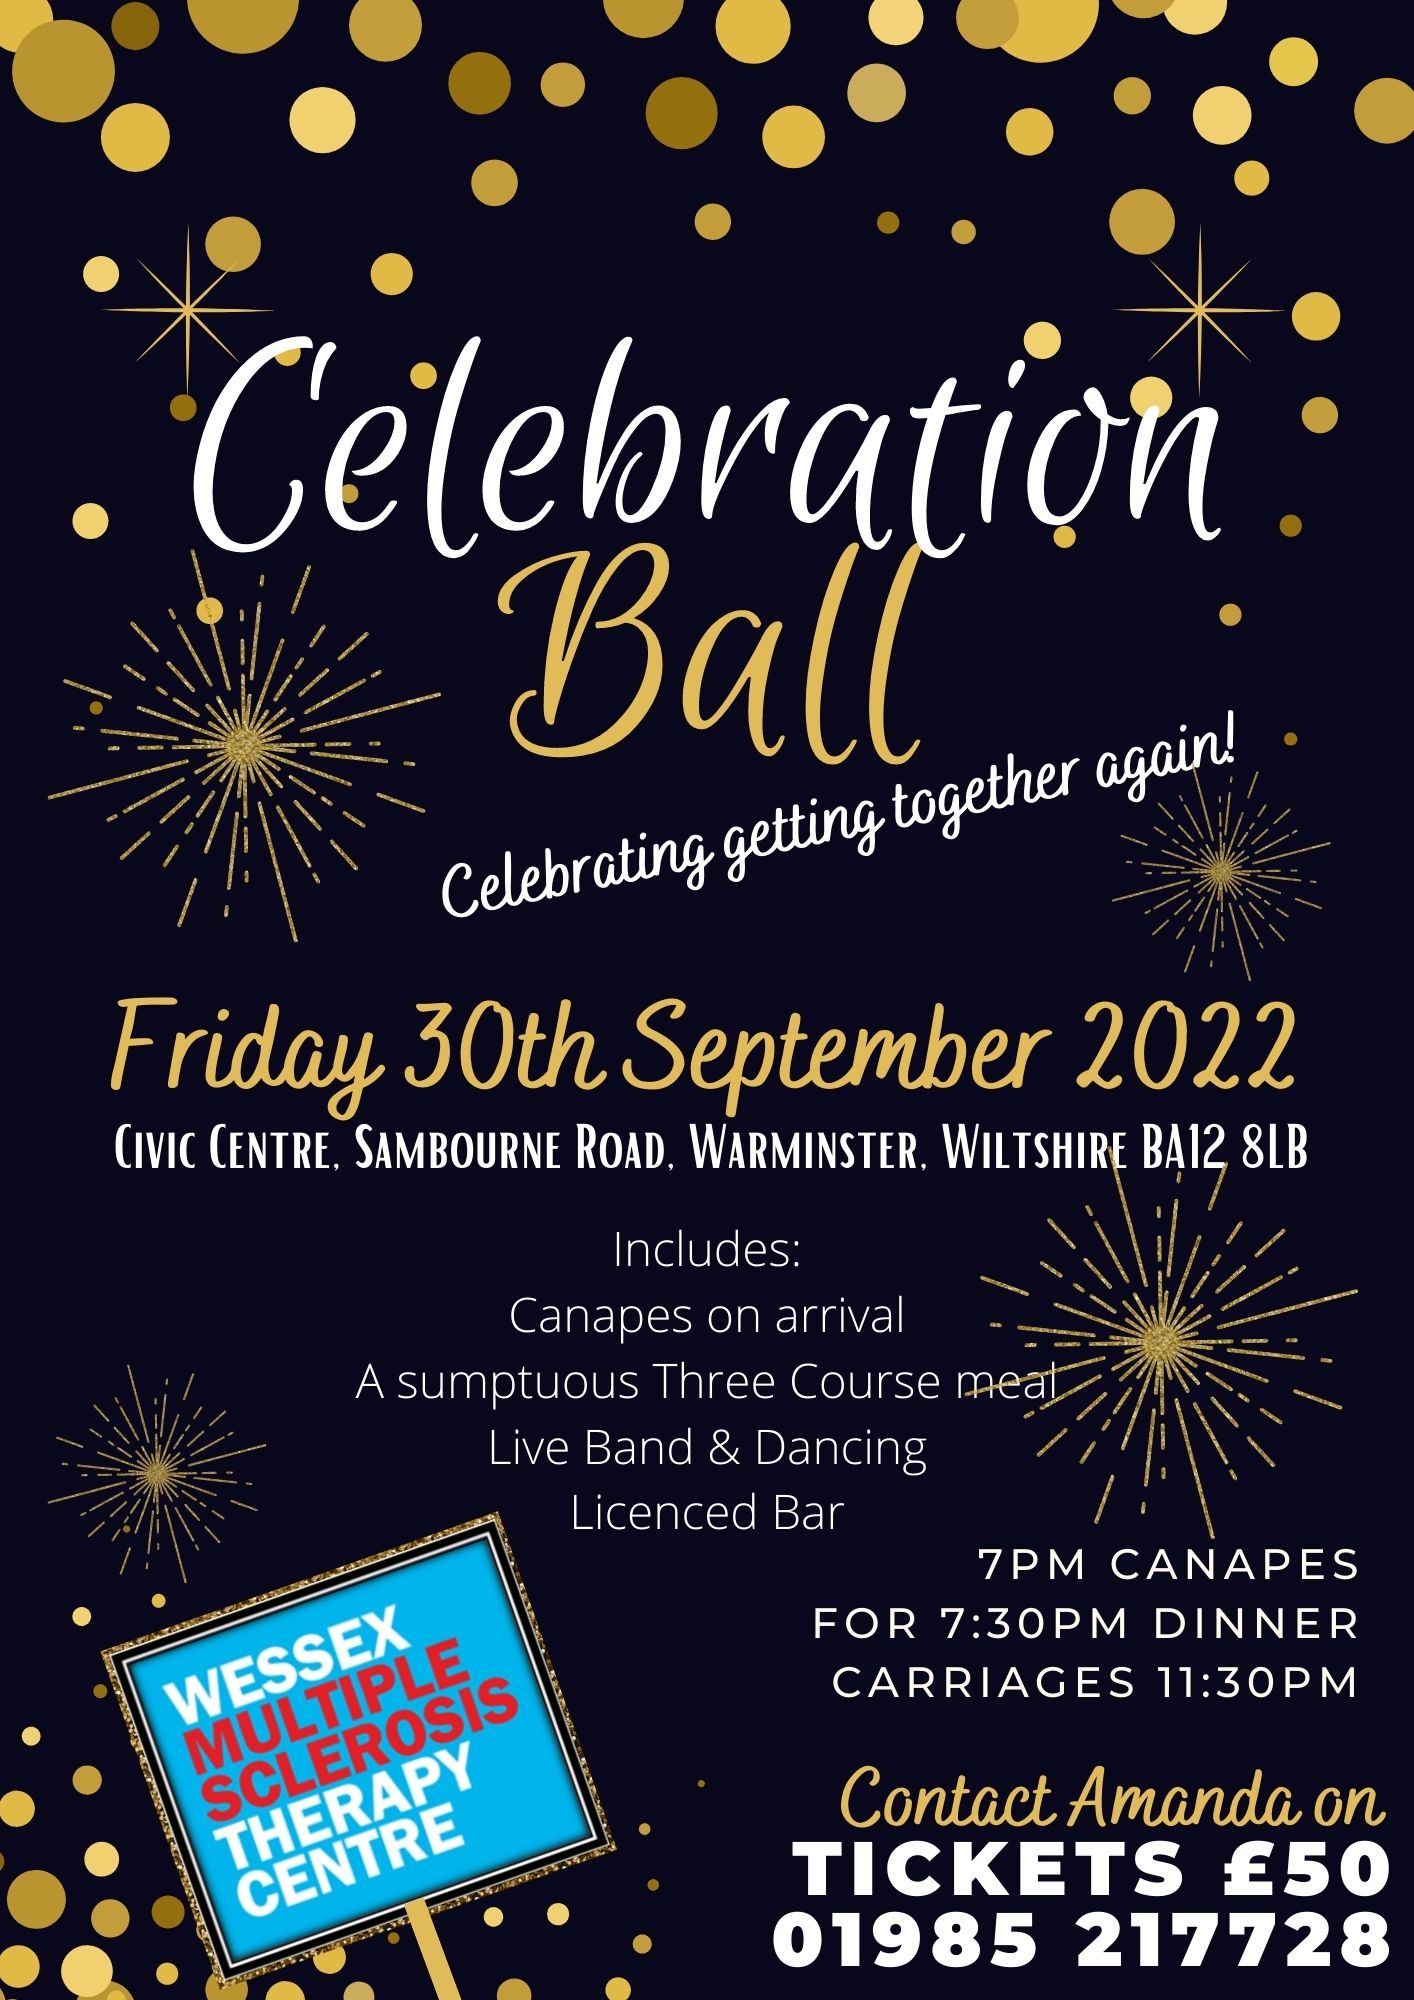 Wessex MS Therapy Centre Celebration Ball